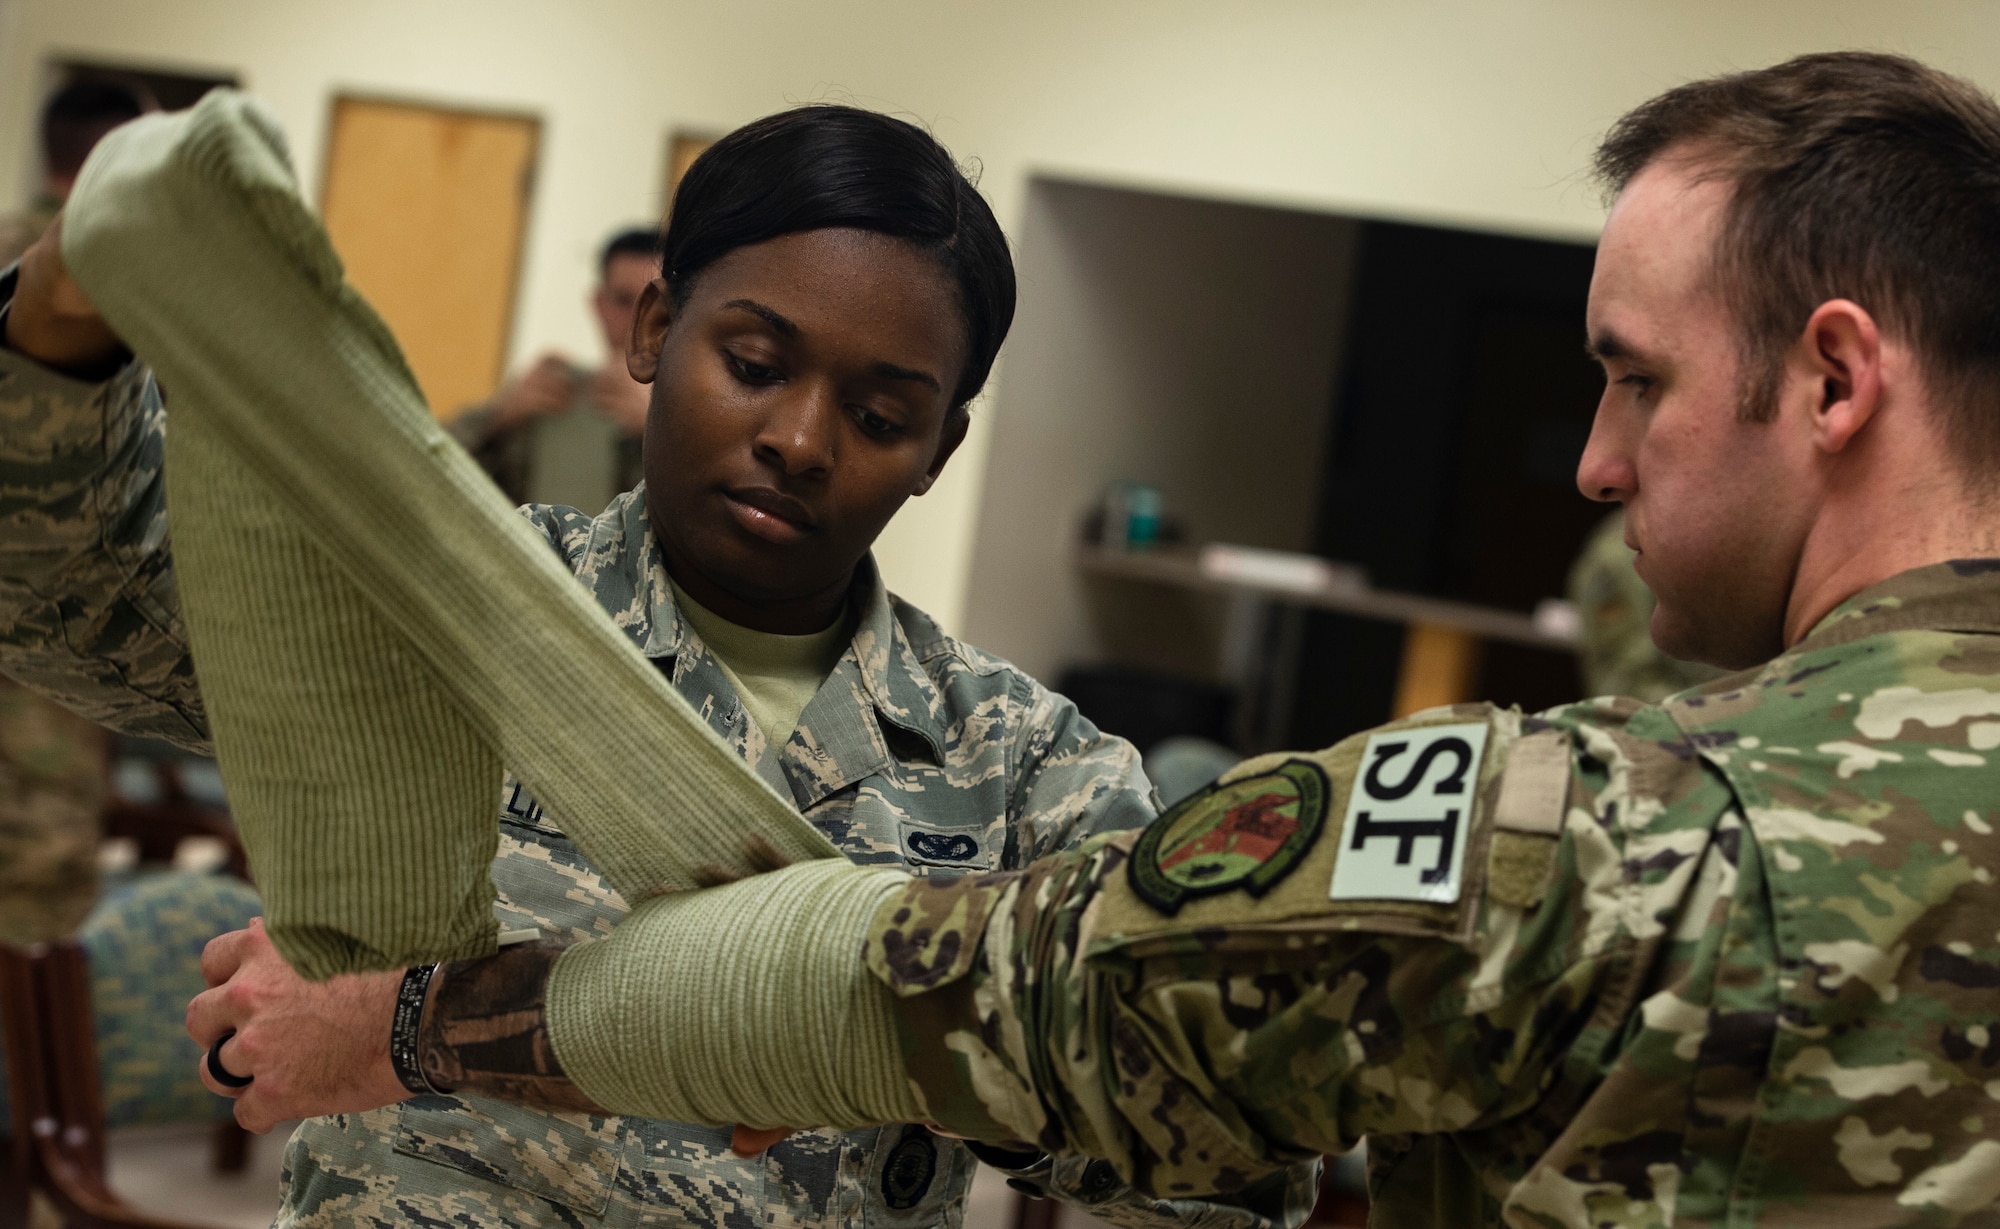 U.S. Air Force Airman 1st Class Taylor Lipscomb, 20th Security Forces Squadron installation entry controller, applies an arm wrap during a self-aid buddy care (SABC) class at Shaw Air Force Base, S.C., Feb. 27, 2019.